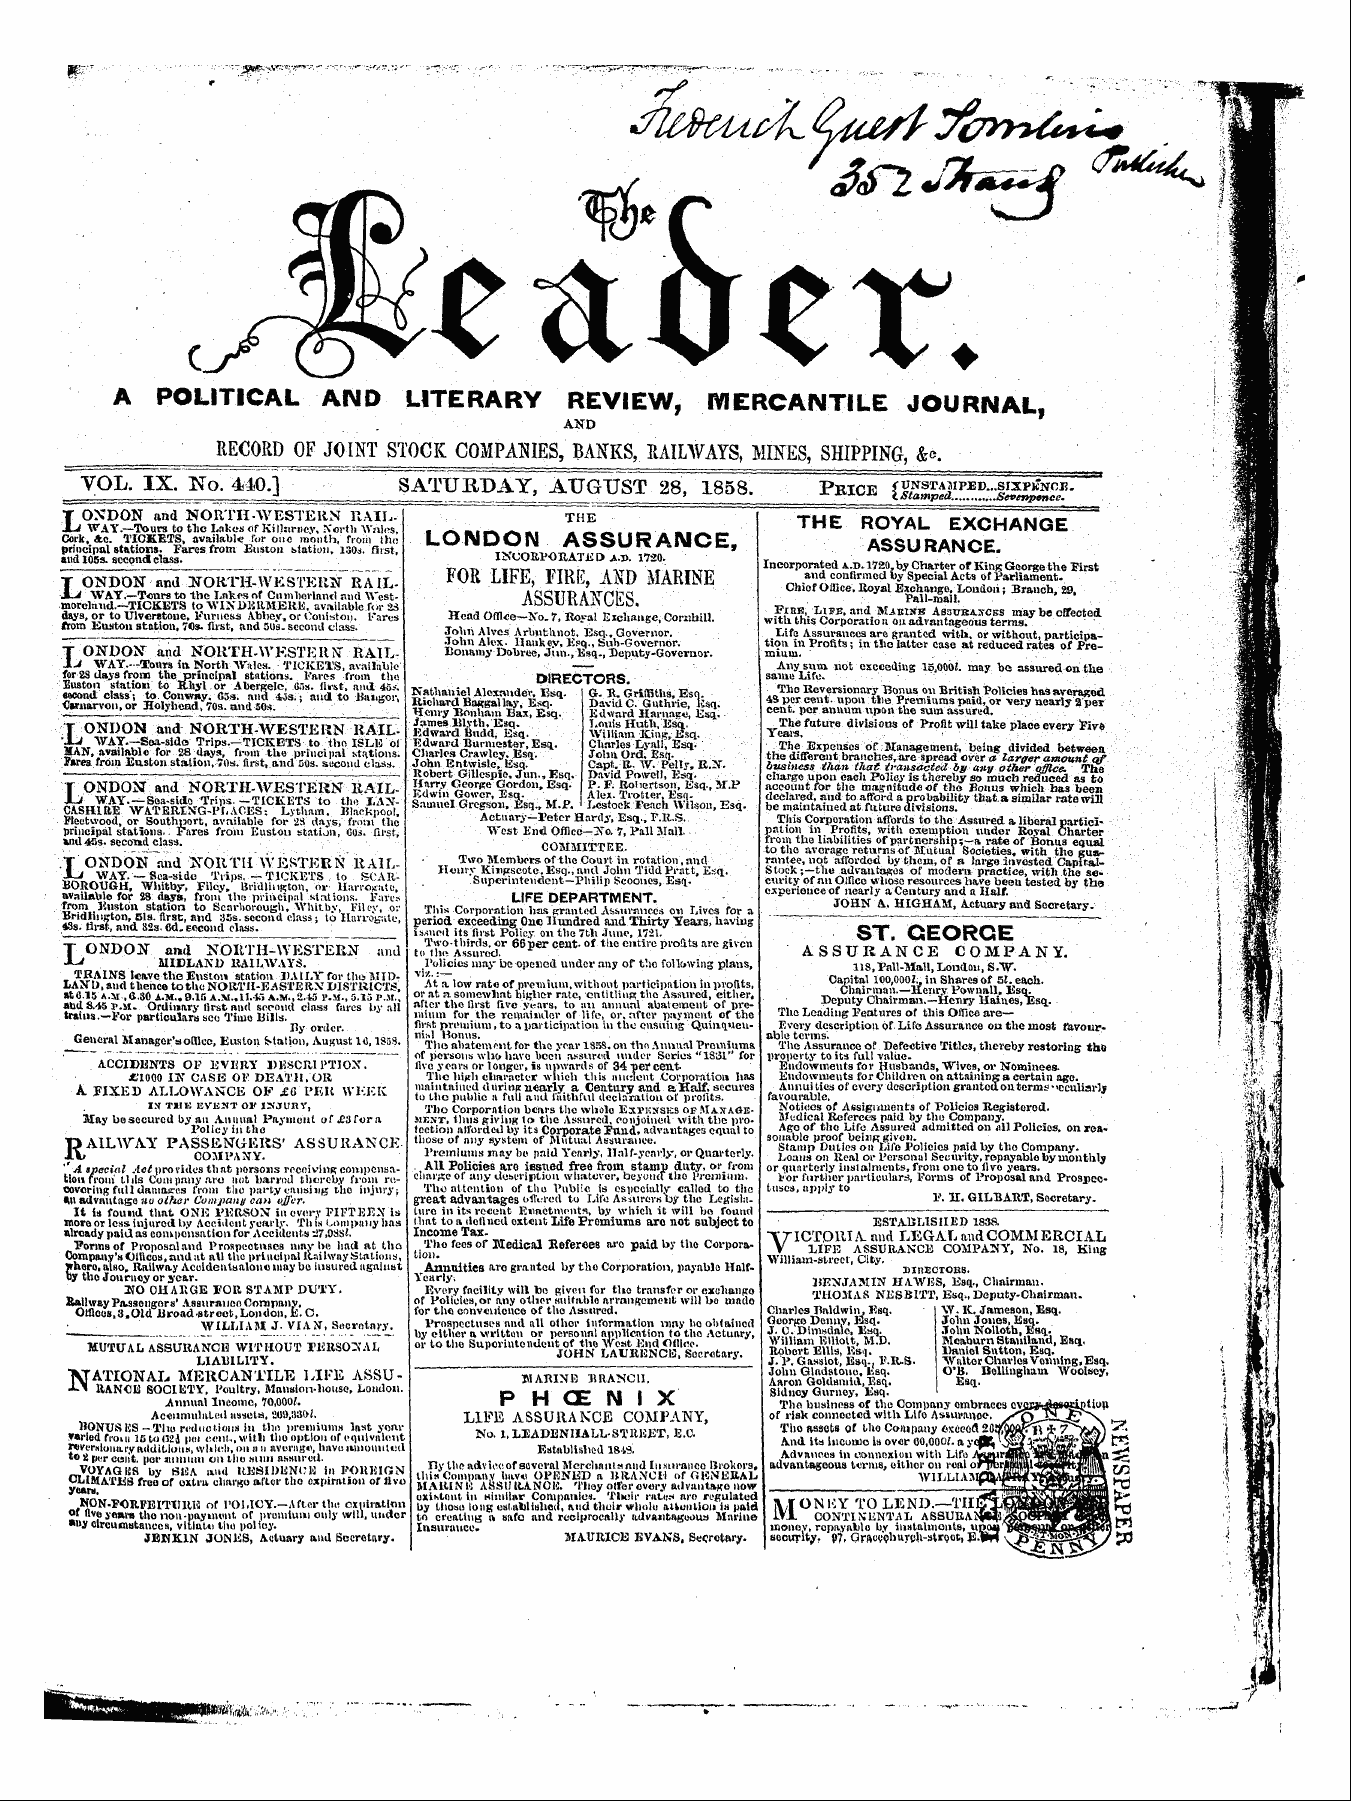 Leader (1850-1860): jS F Y, 1st edition - Ad00109